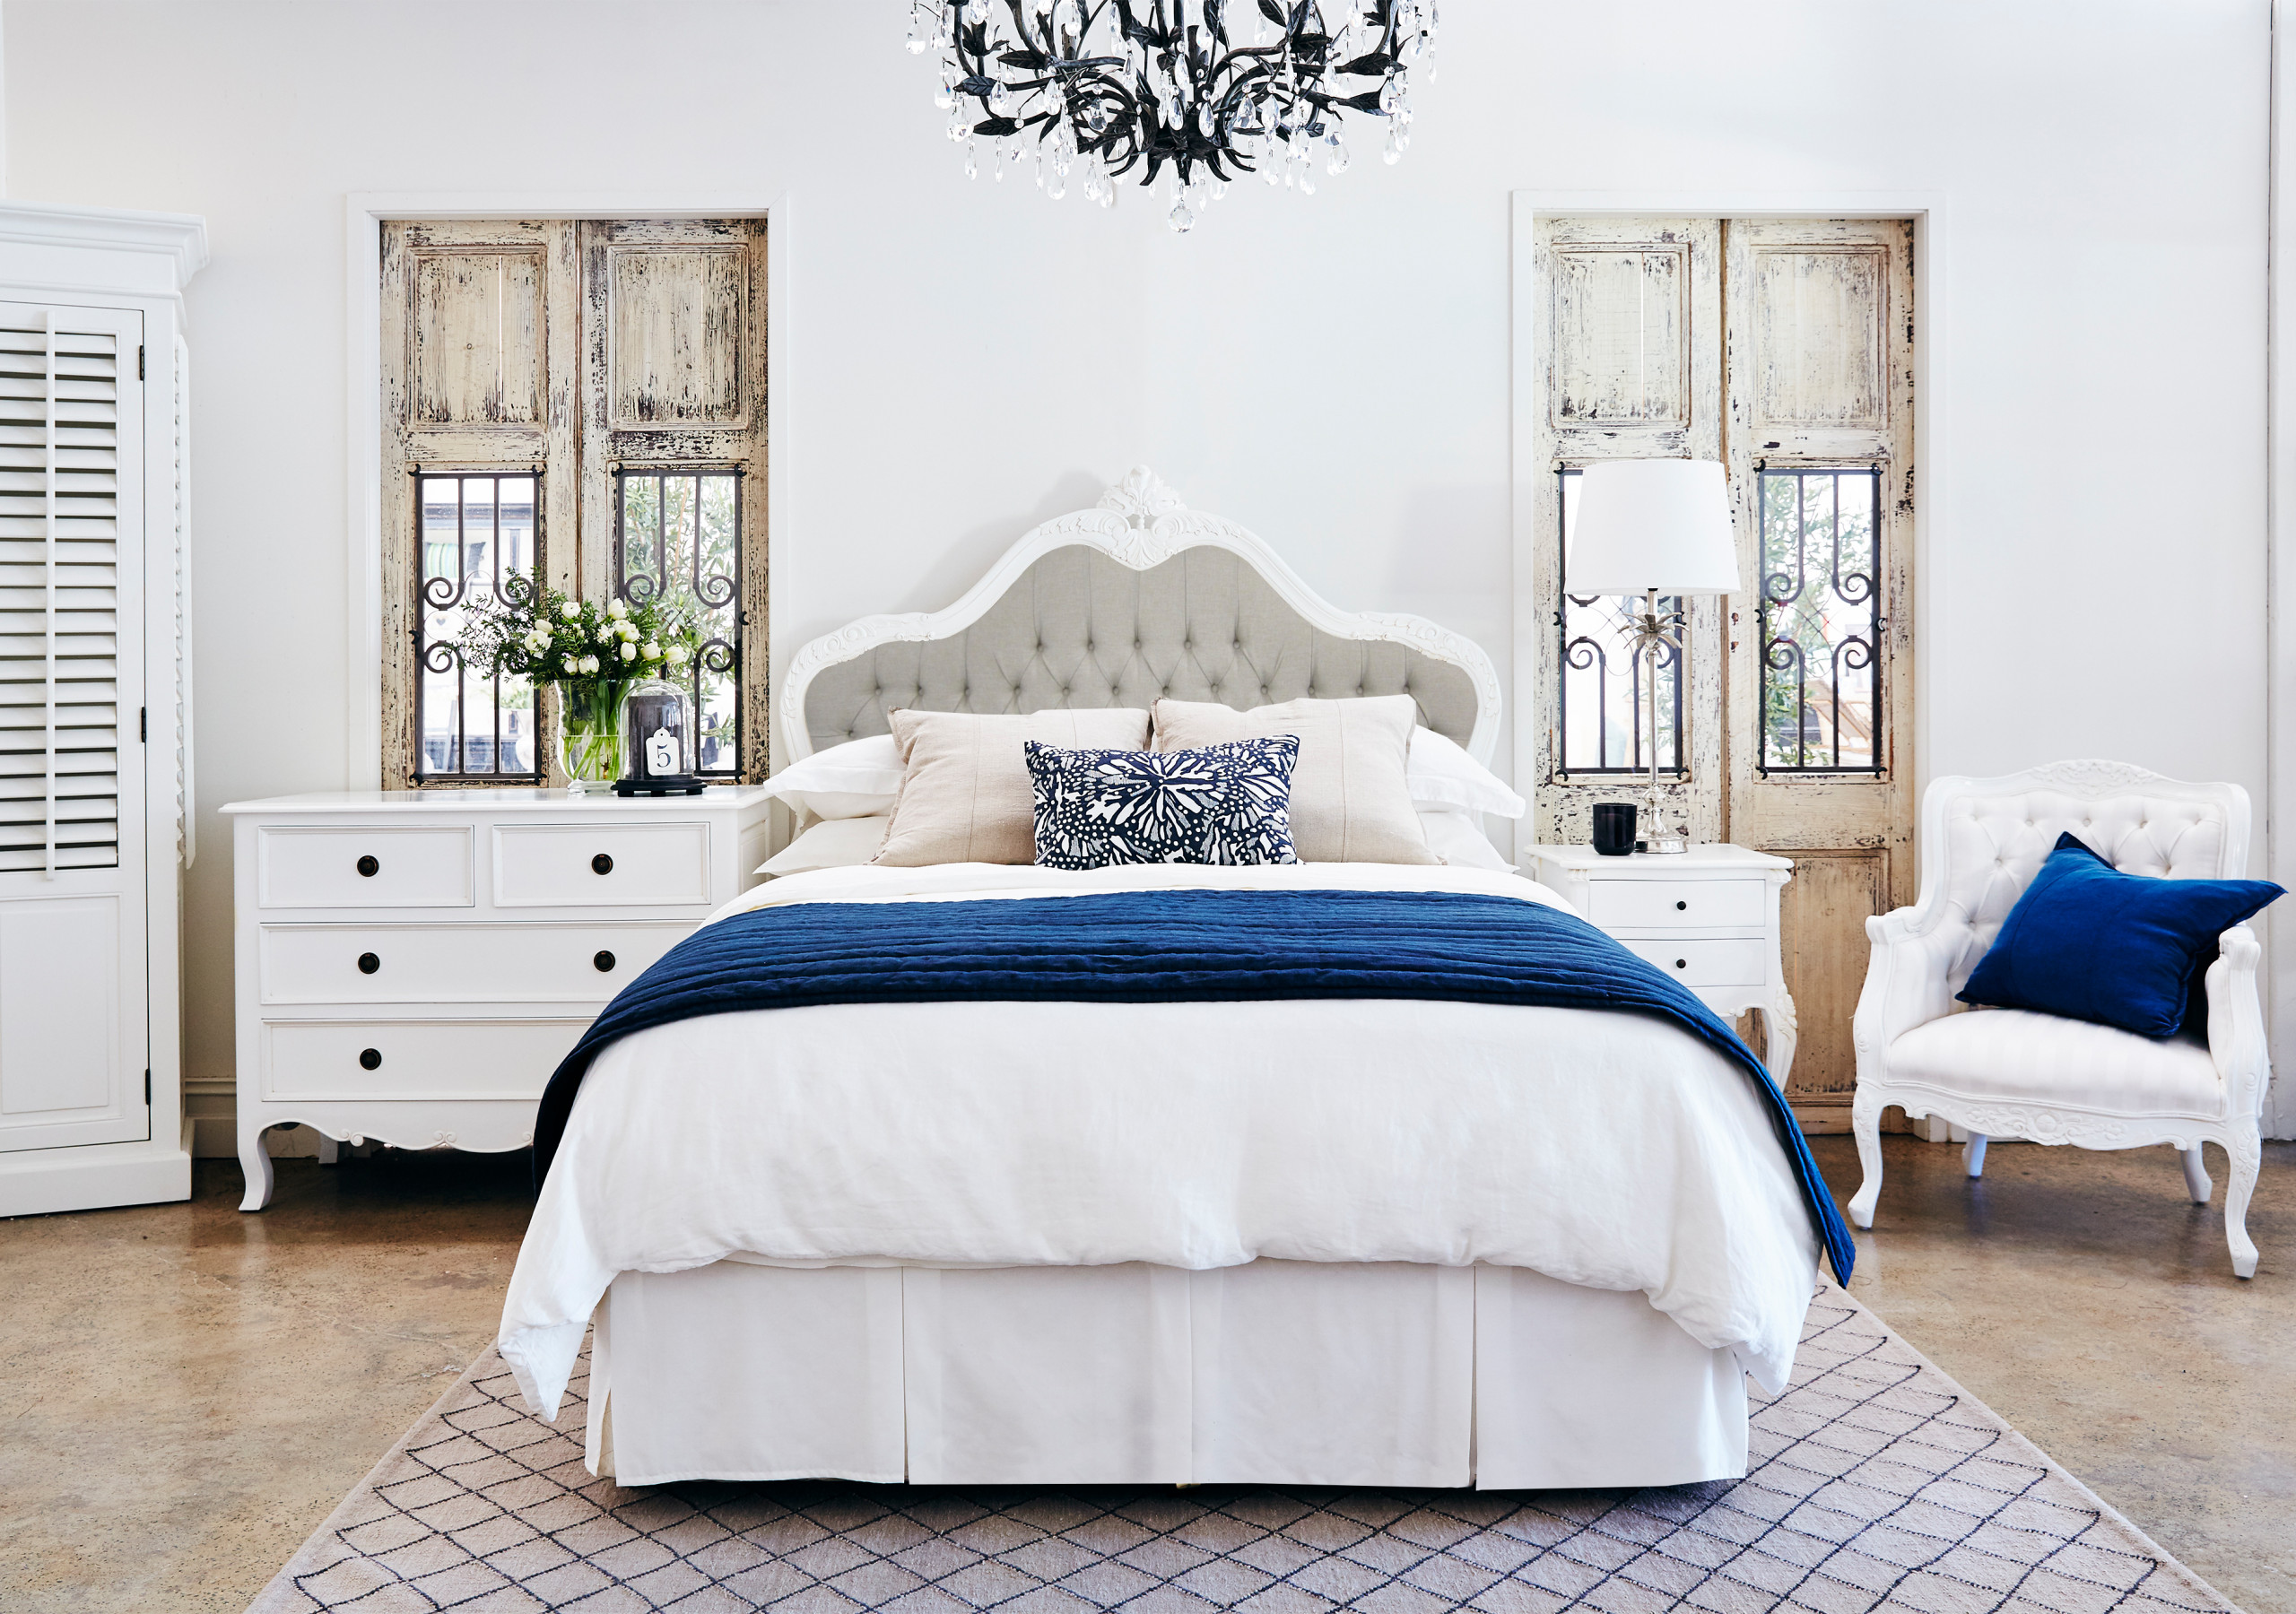 French Provincial Style Bedroom - Photos & Ideas | Houzz